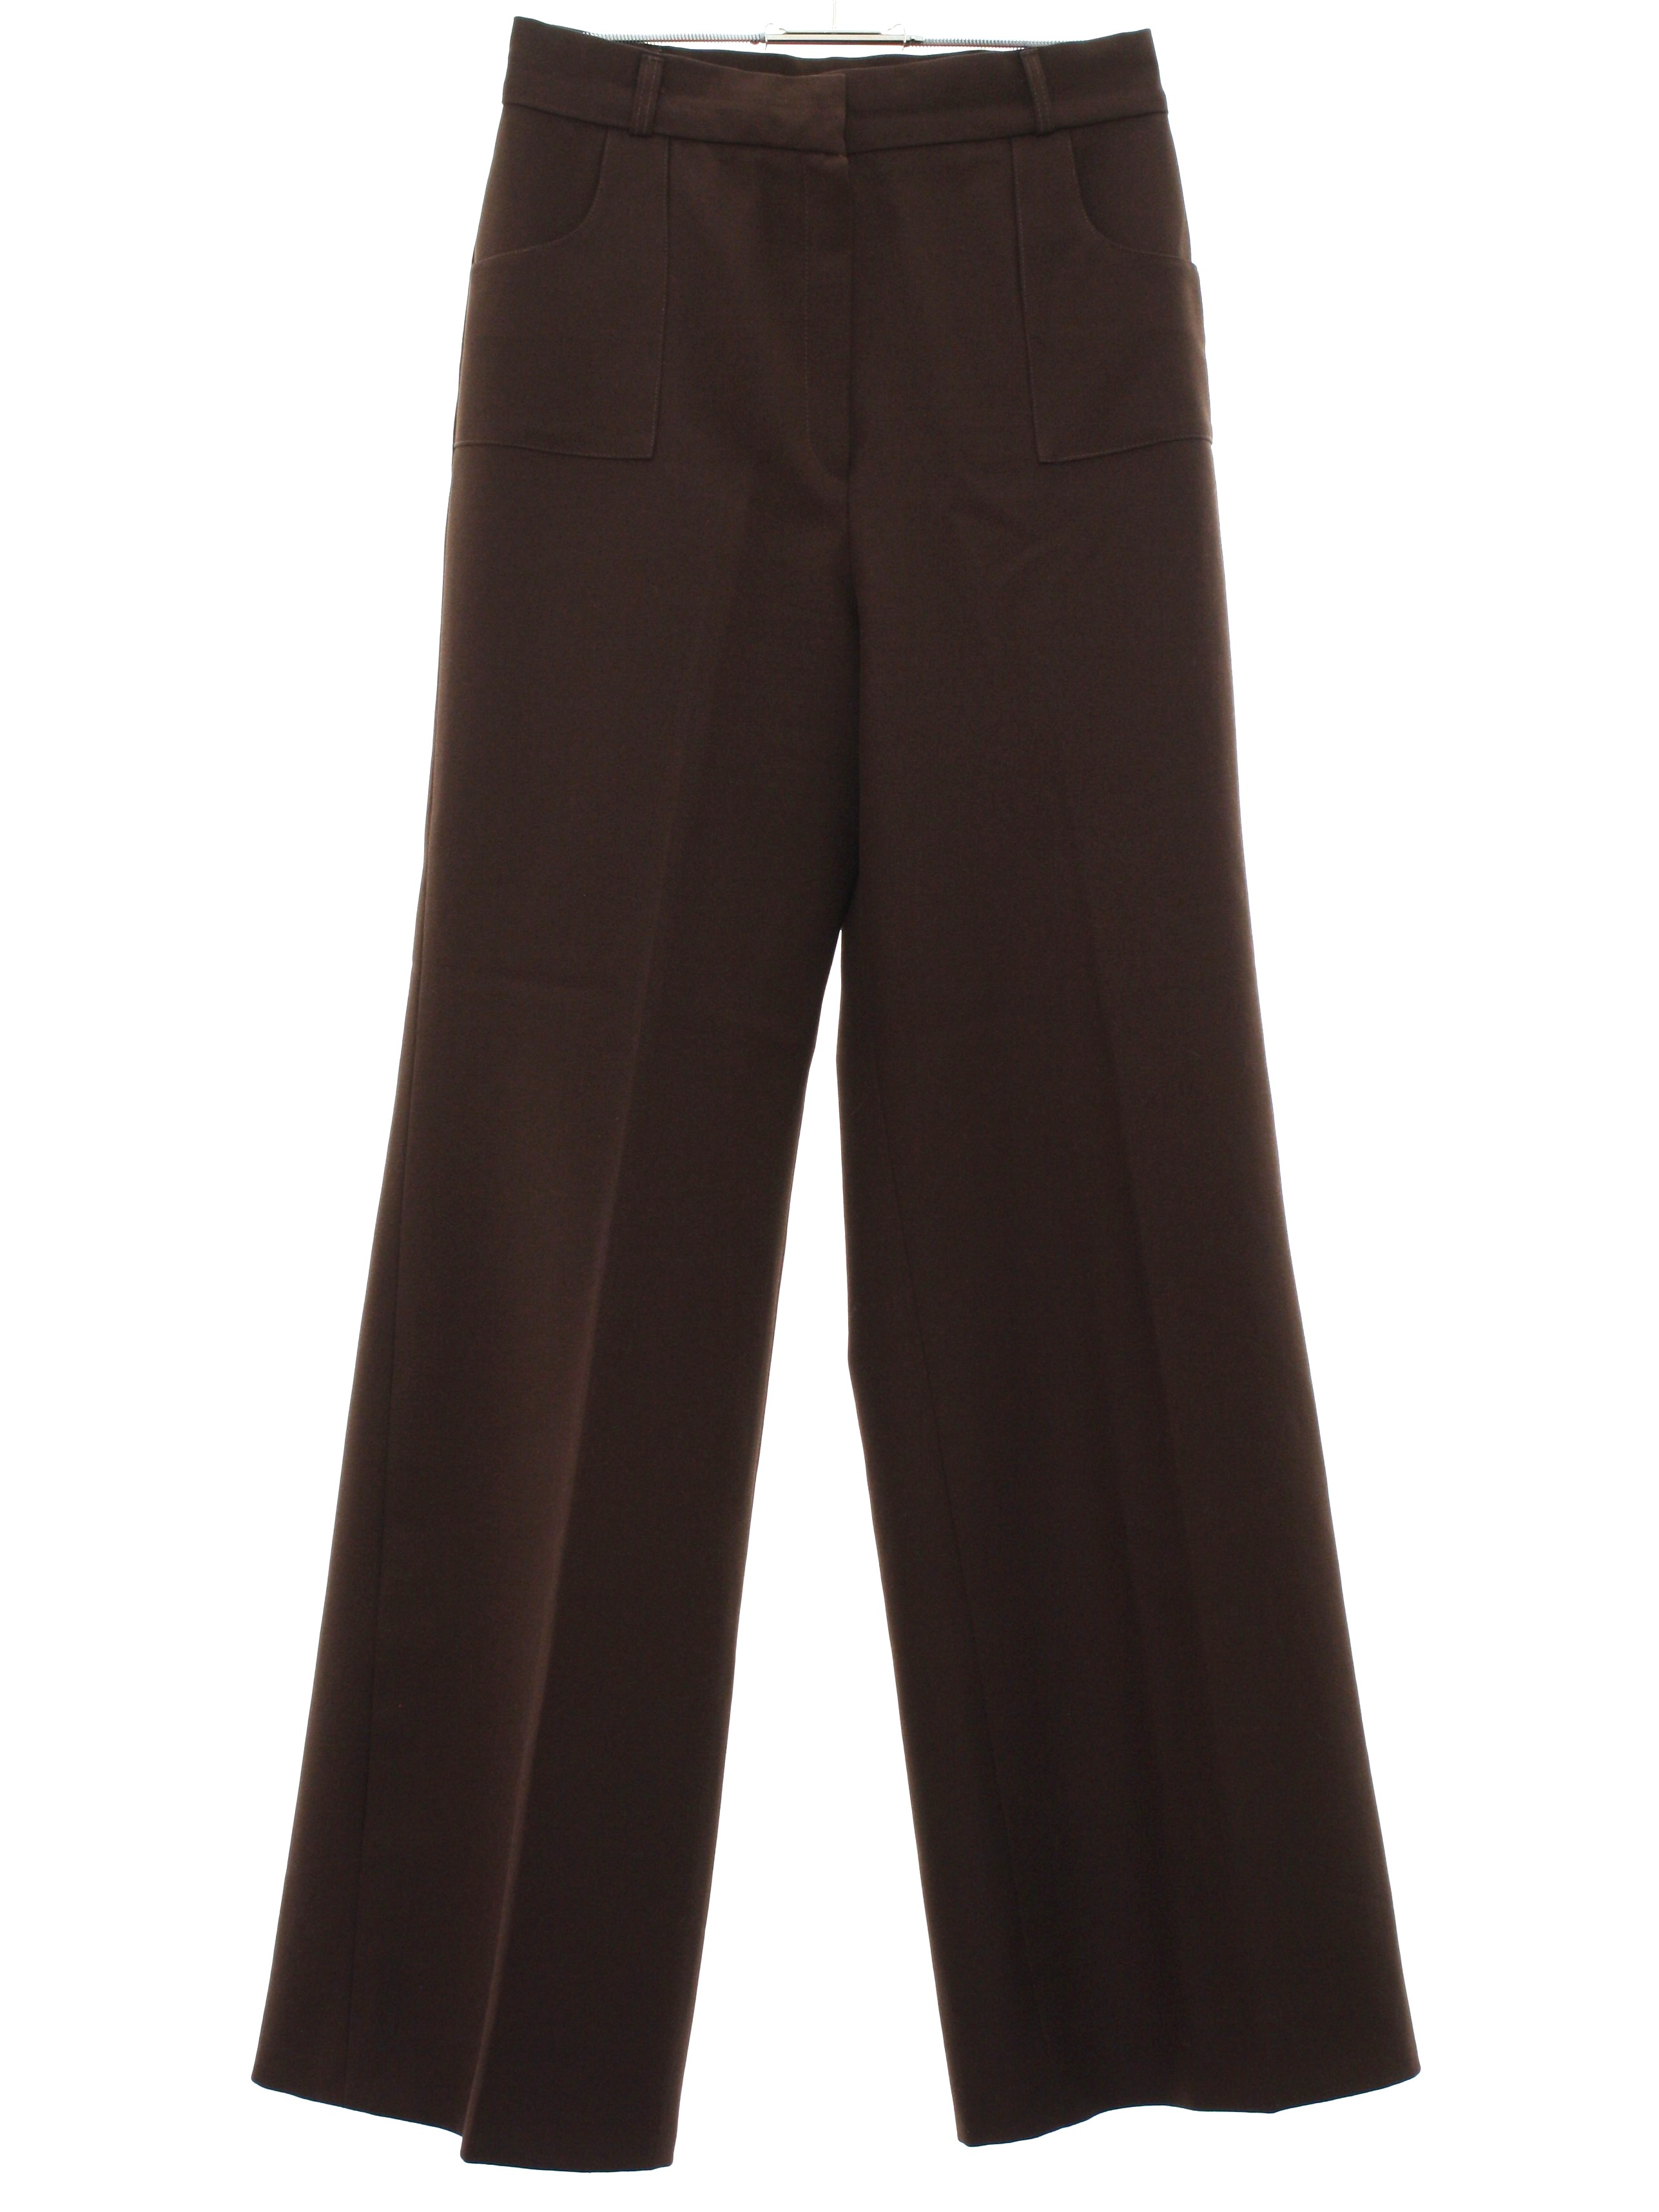 70s Vintage Panther Flared Pants / Flares: Late 70s or early 80s ...